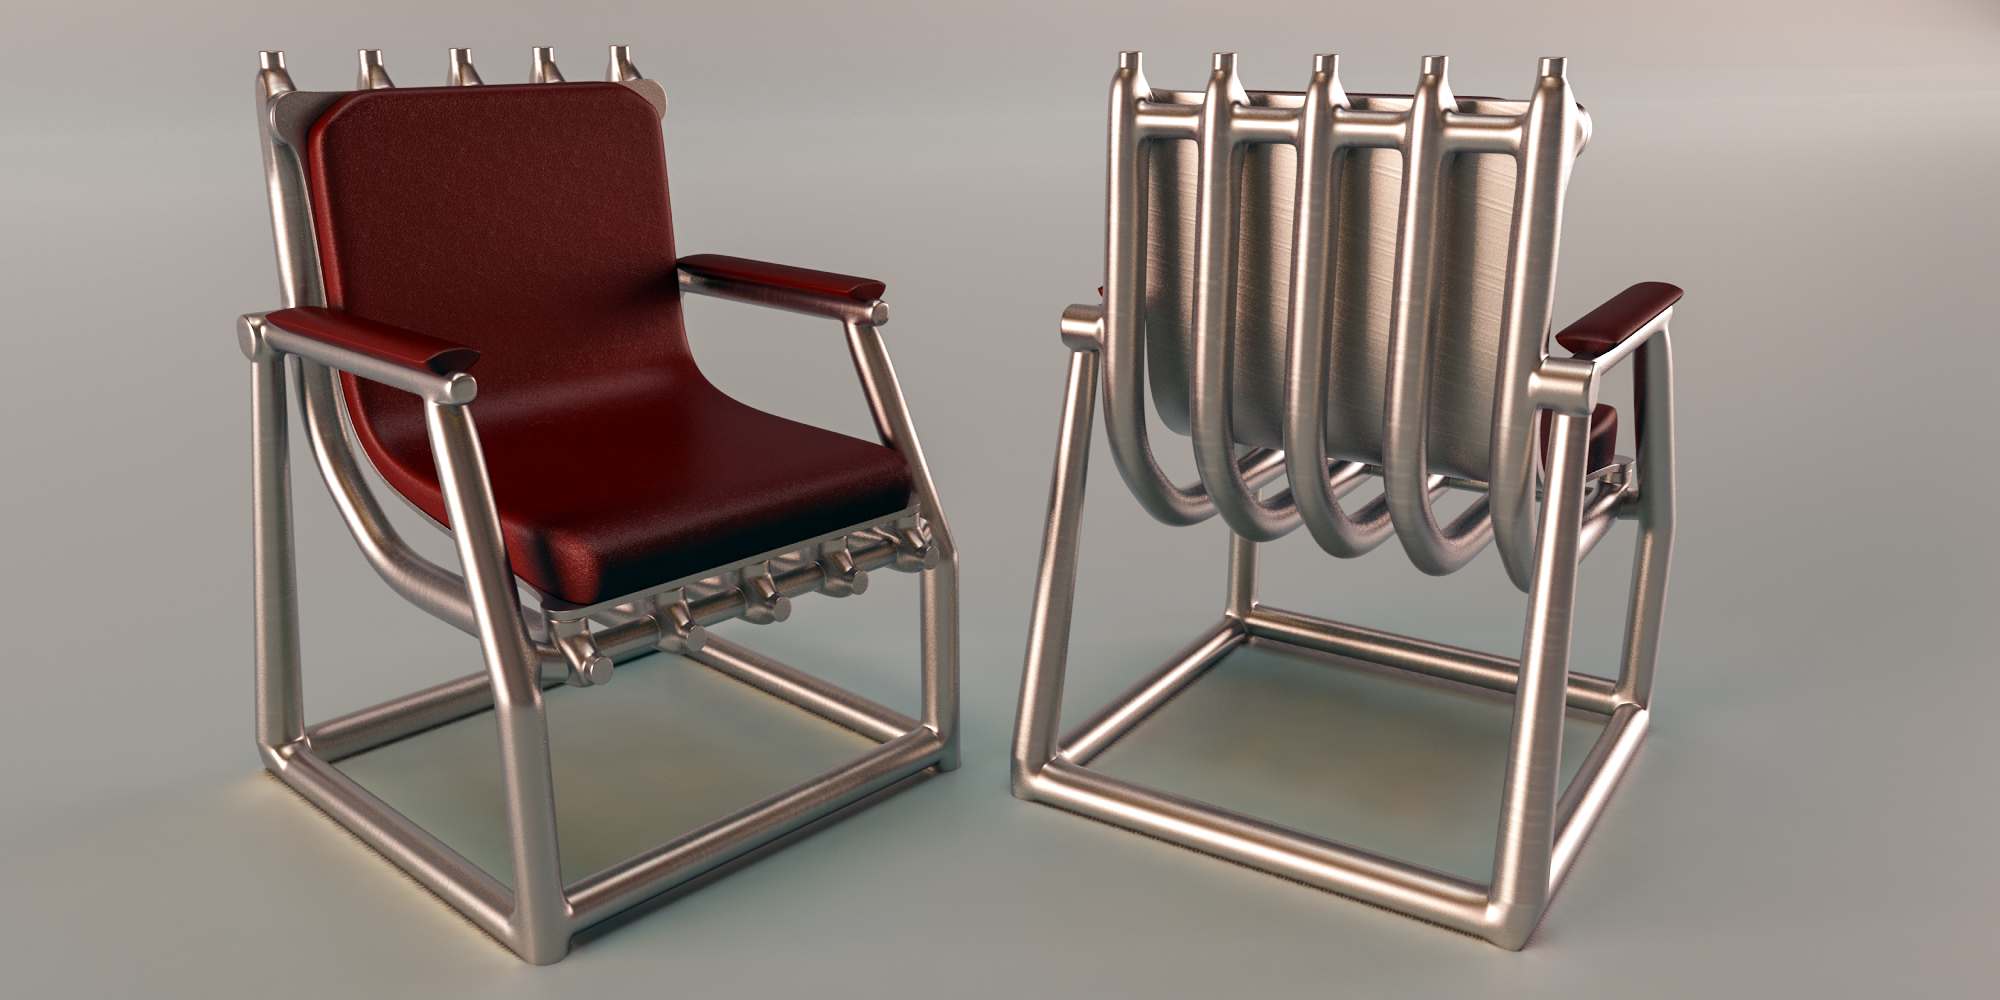 industrialdesign2 Industrial Design Modeled and Rendered in Modo by Mike Grauer